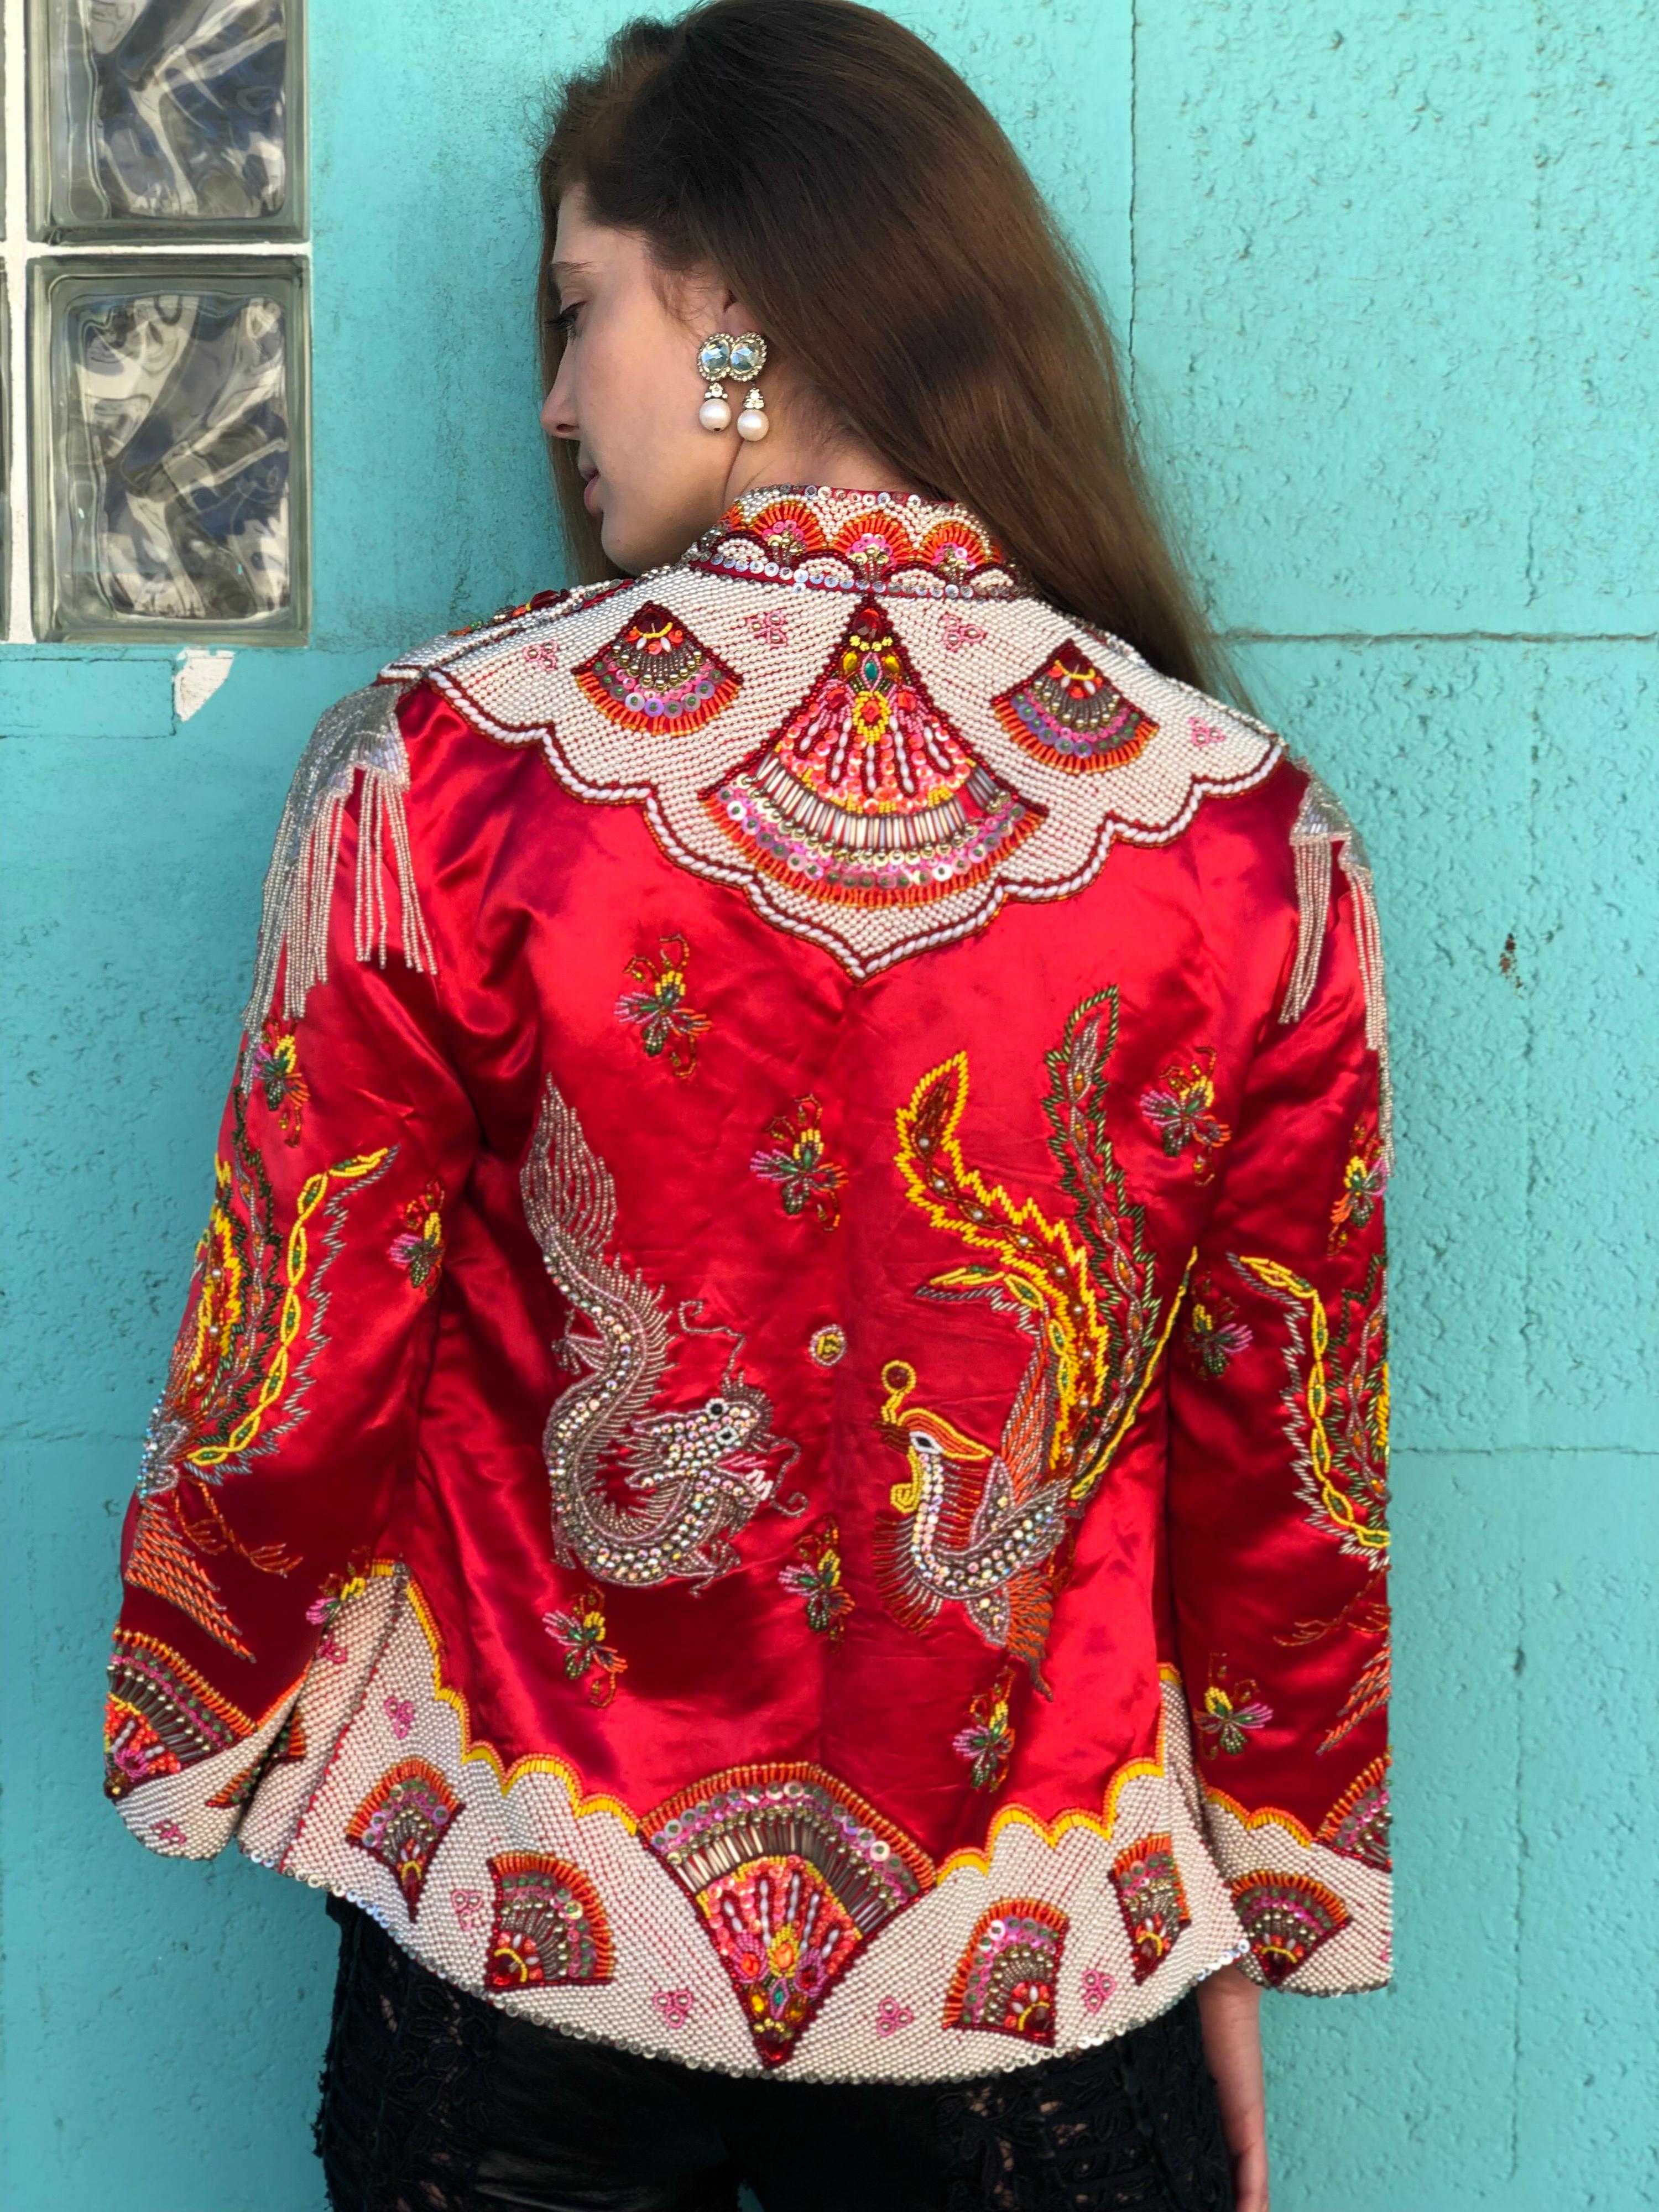 Talk about a true vintage piece! Designed by Dynasty circa 1960s, this red satin jacket is completely hand beaded with a variety of colorful sequins, rhinestones and pearls to form various Phoenix and Dragon motifs on the front and back. Jacket